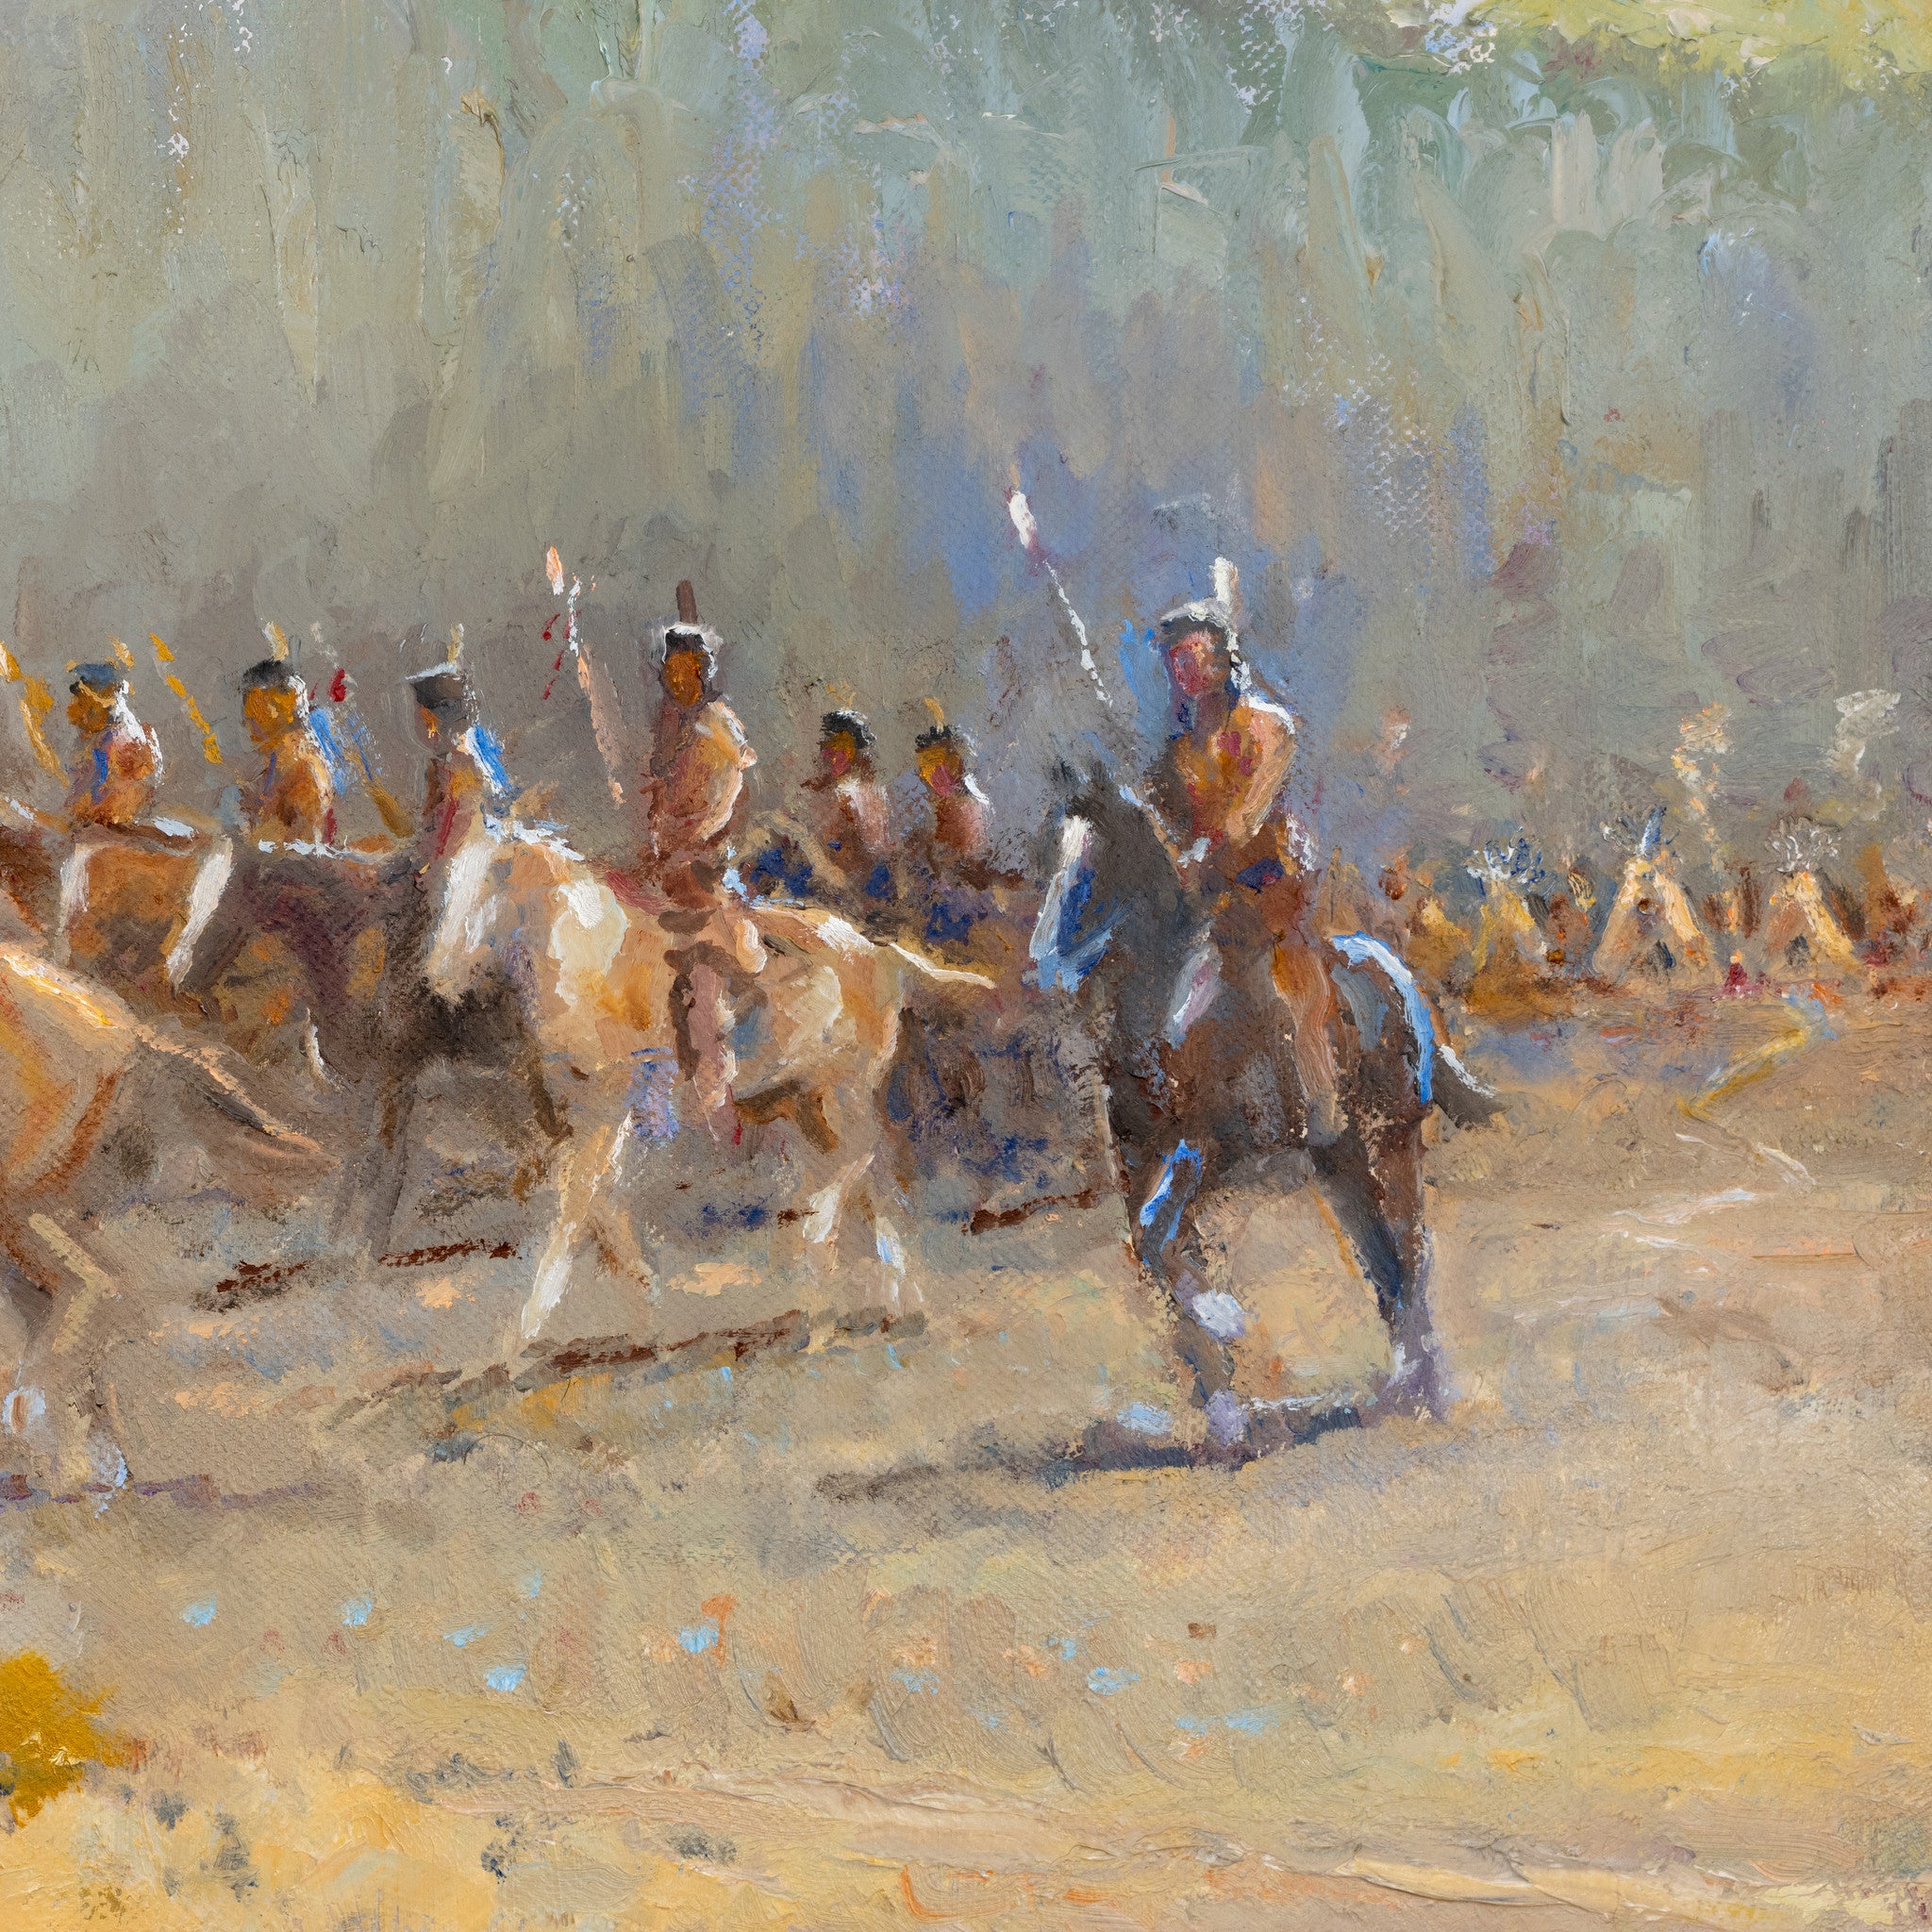 The Victory March by Jim Carkhuff